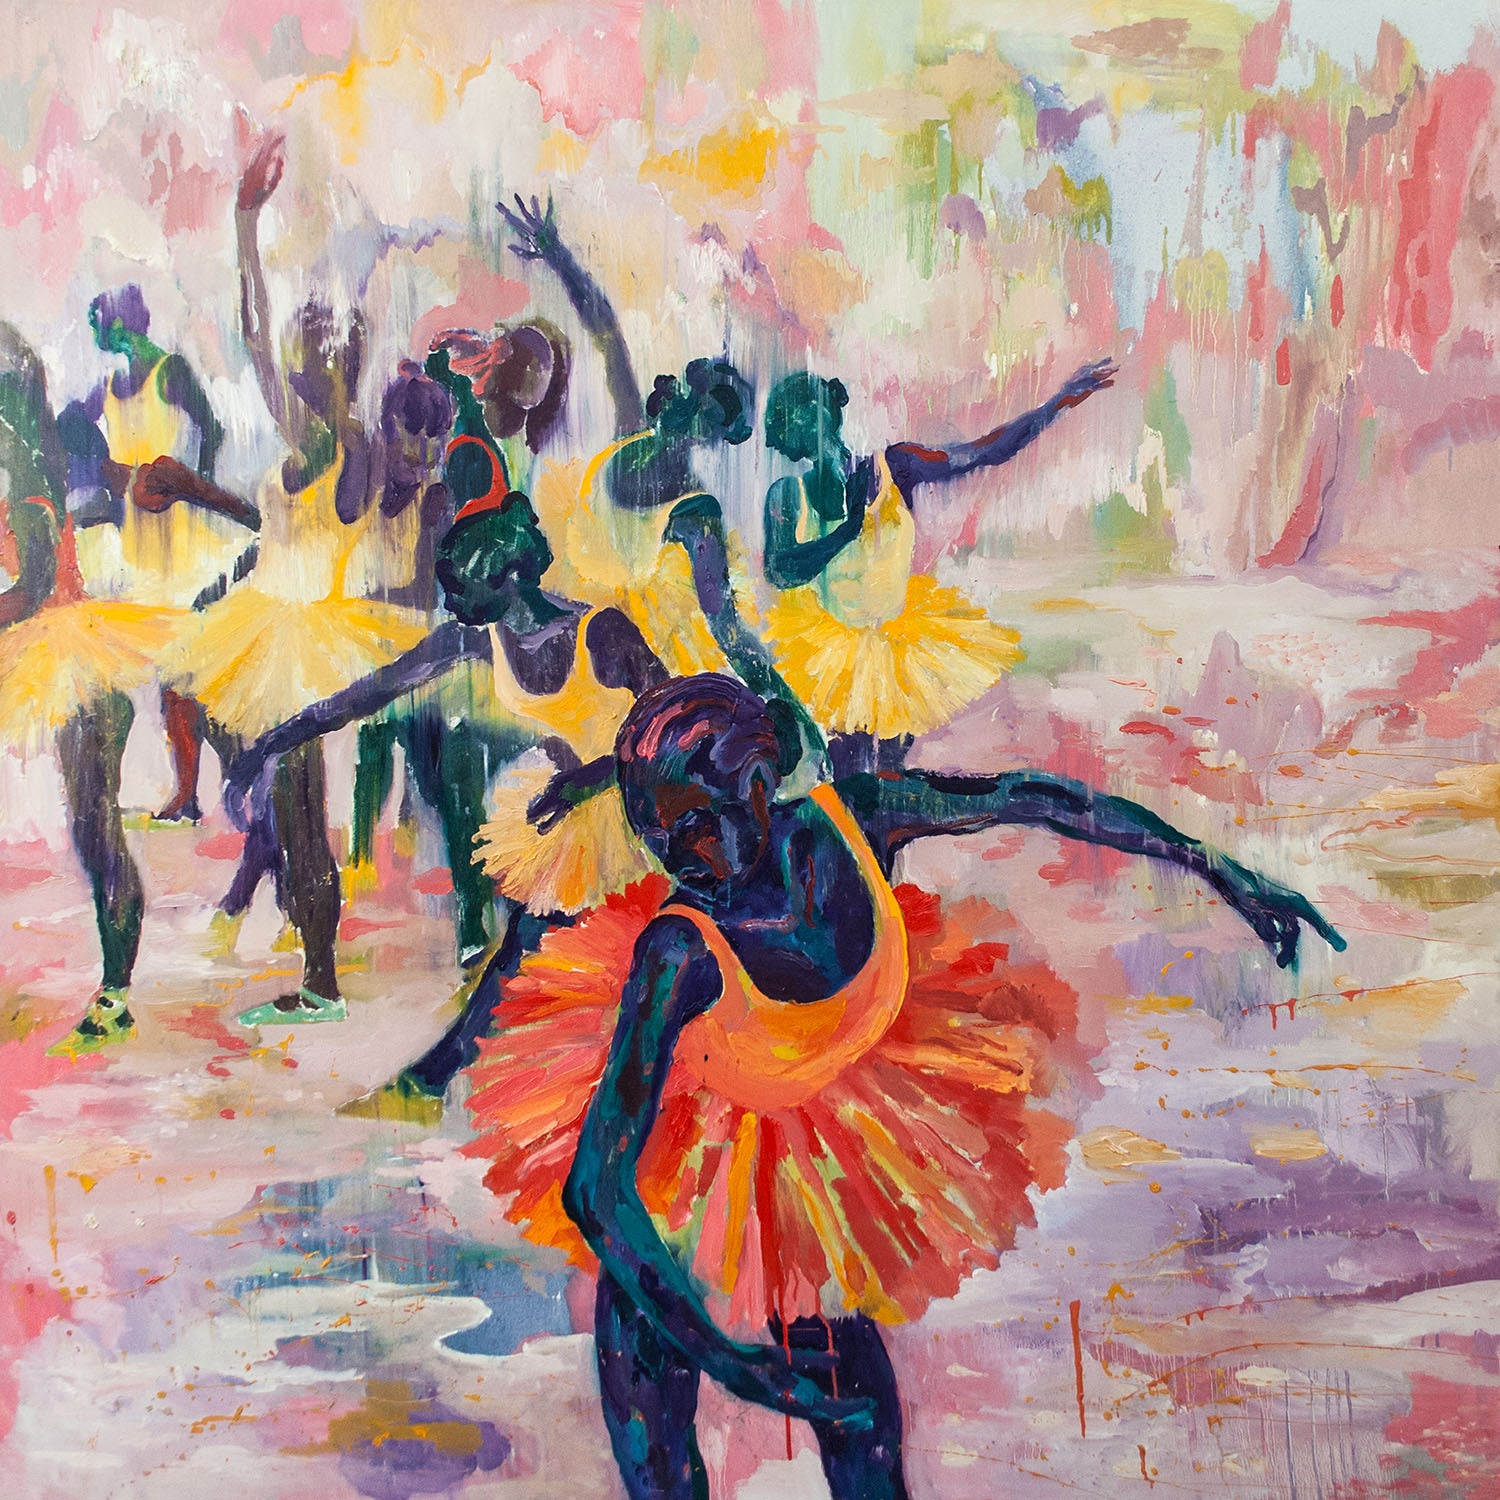 Dancers of Tenderness, 150x150cm, oil on canvas painting, 2021 by Dominic Virtosu